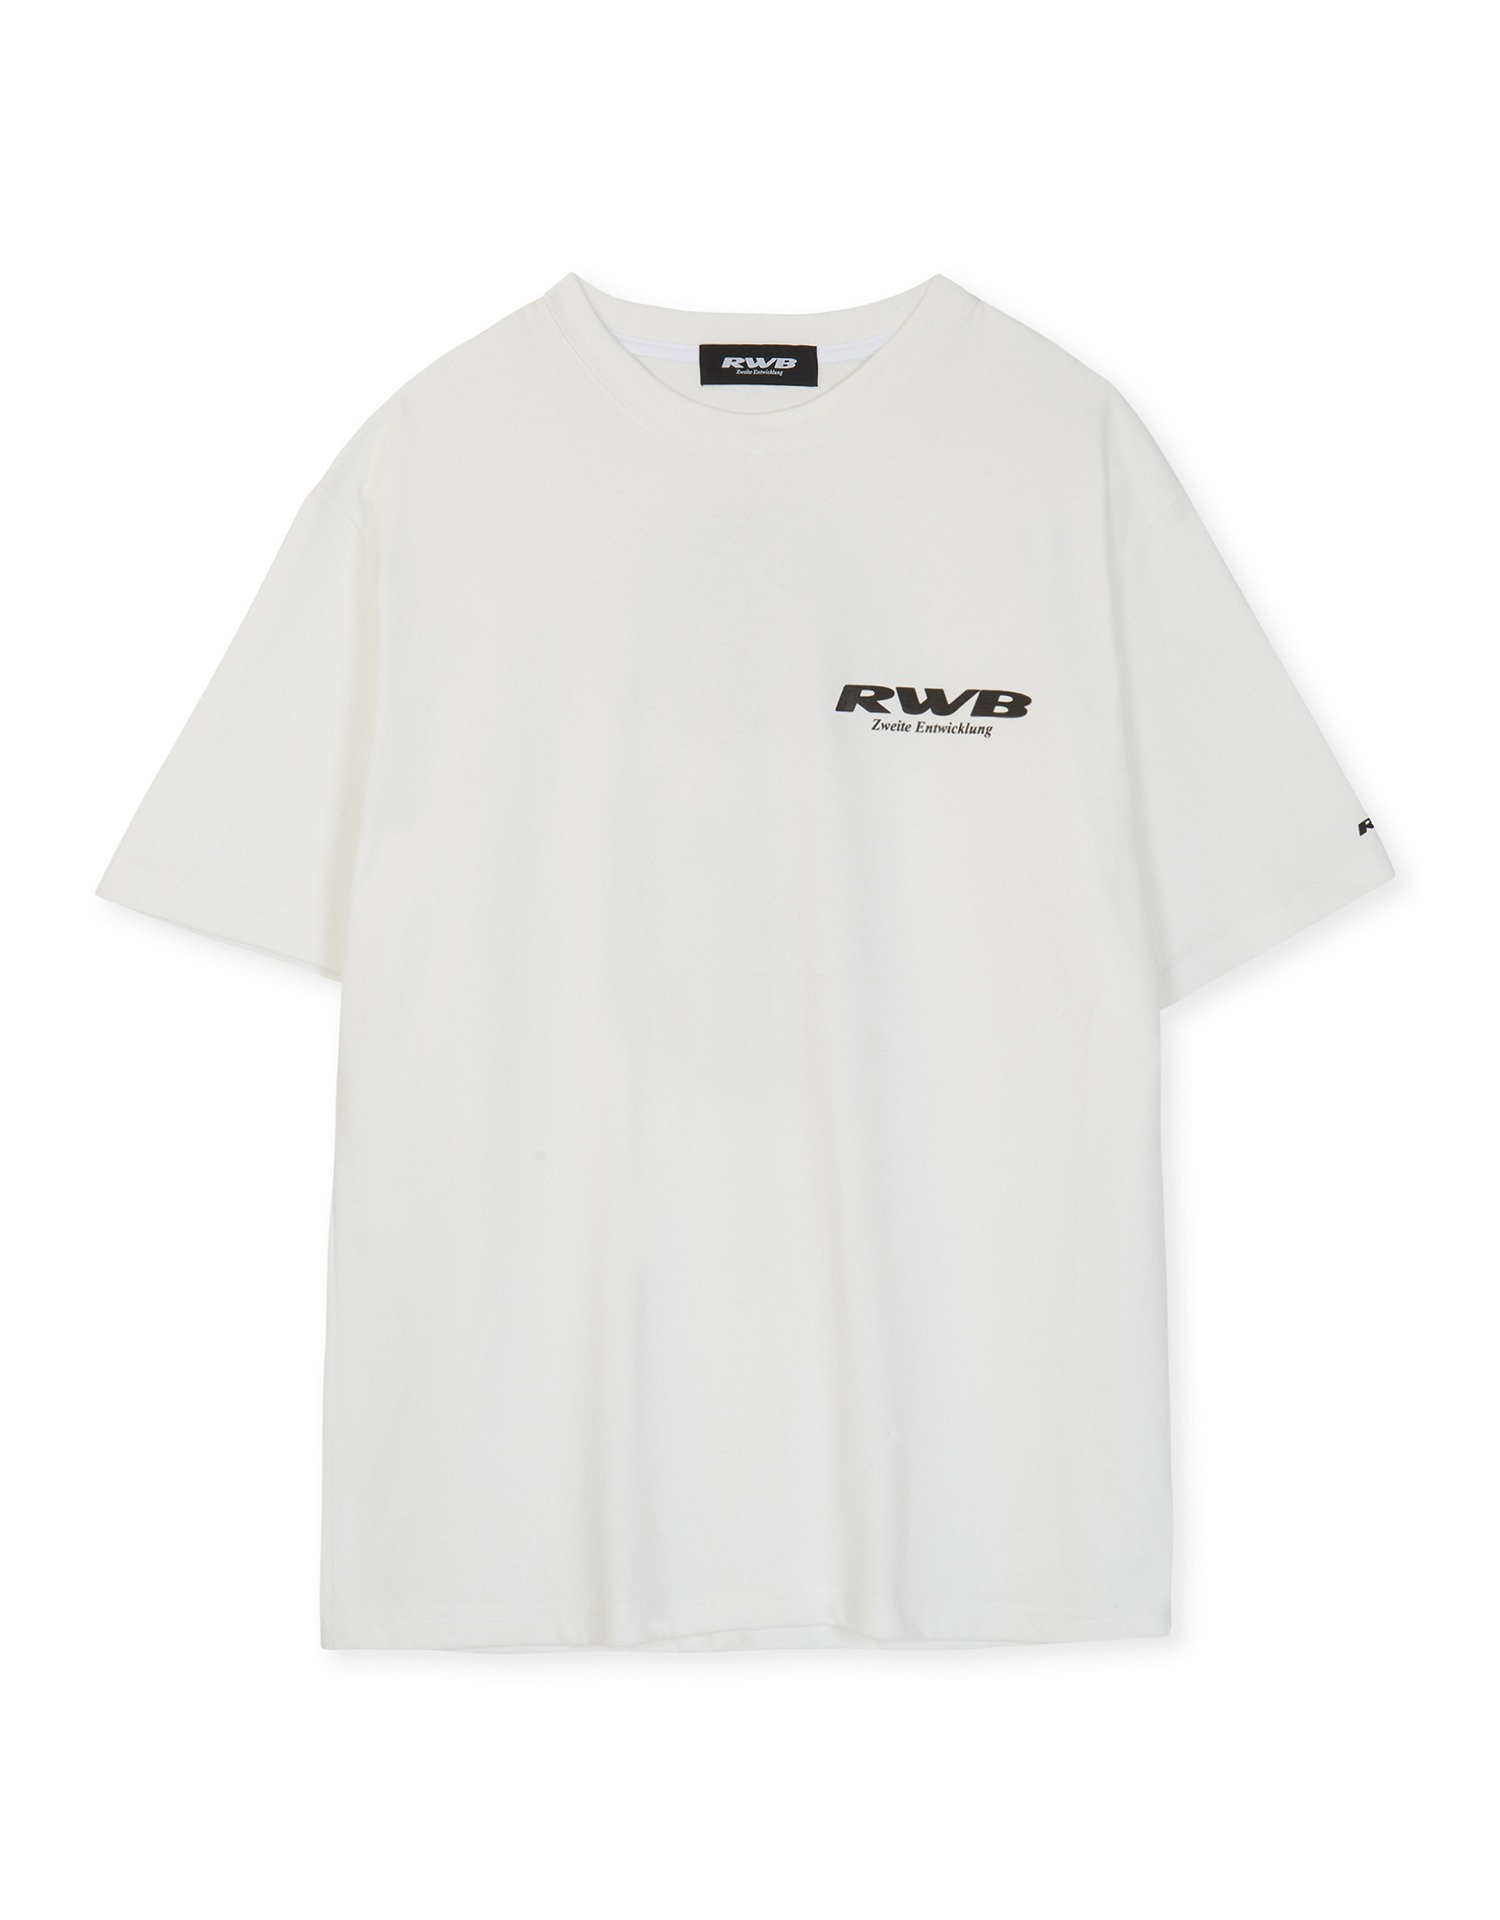 Road Sign S/S Tee - White